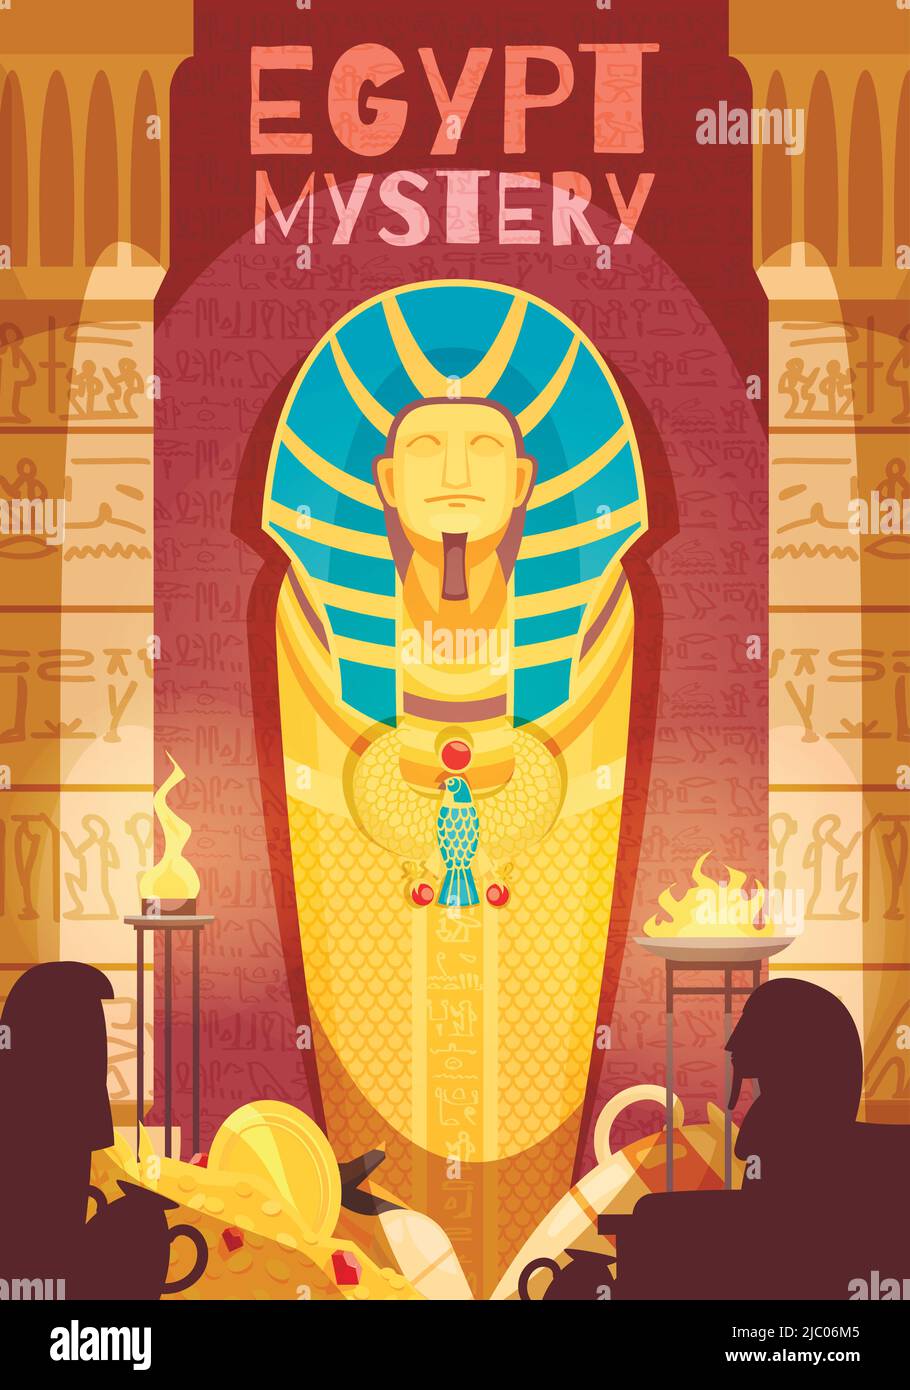 Ancient egyptian mummy mystery exhibit poster with grave goods golden amulets ritual fire deities silhouettes vector illustration Stock Vector